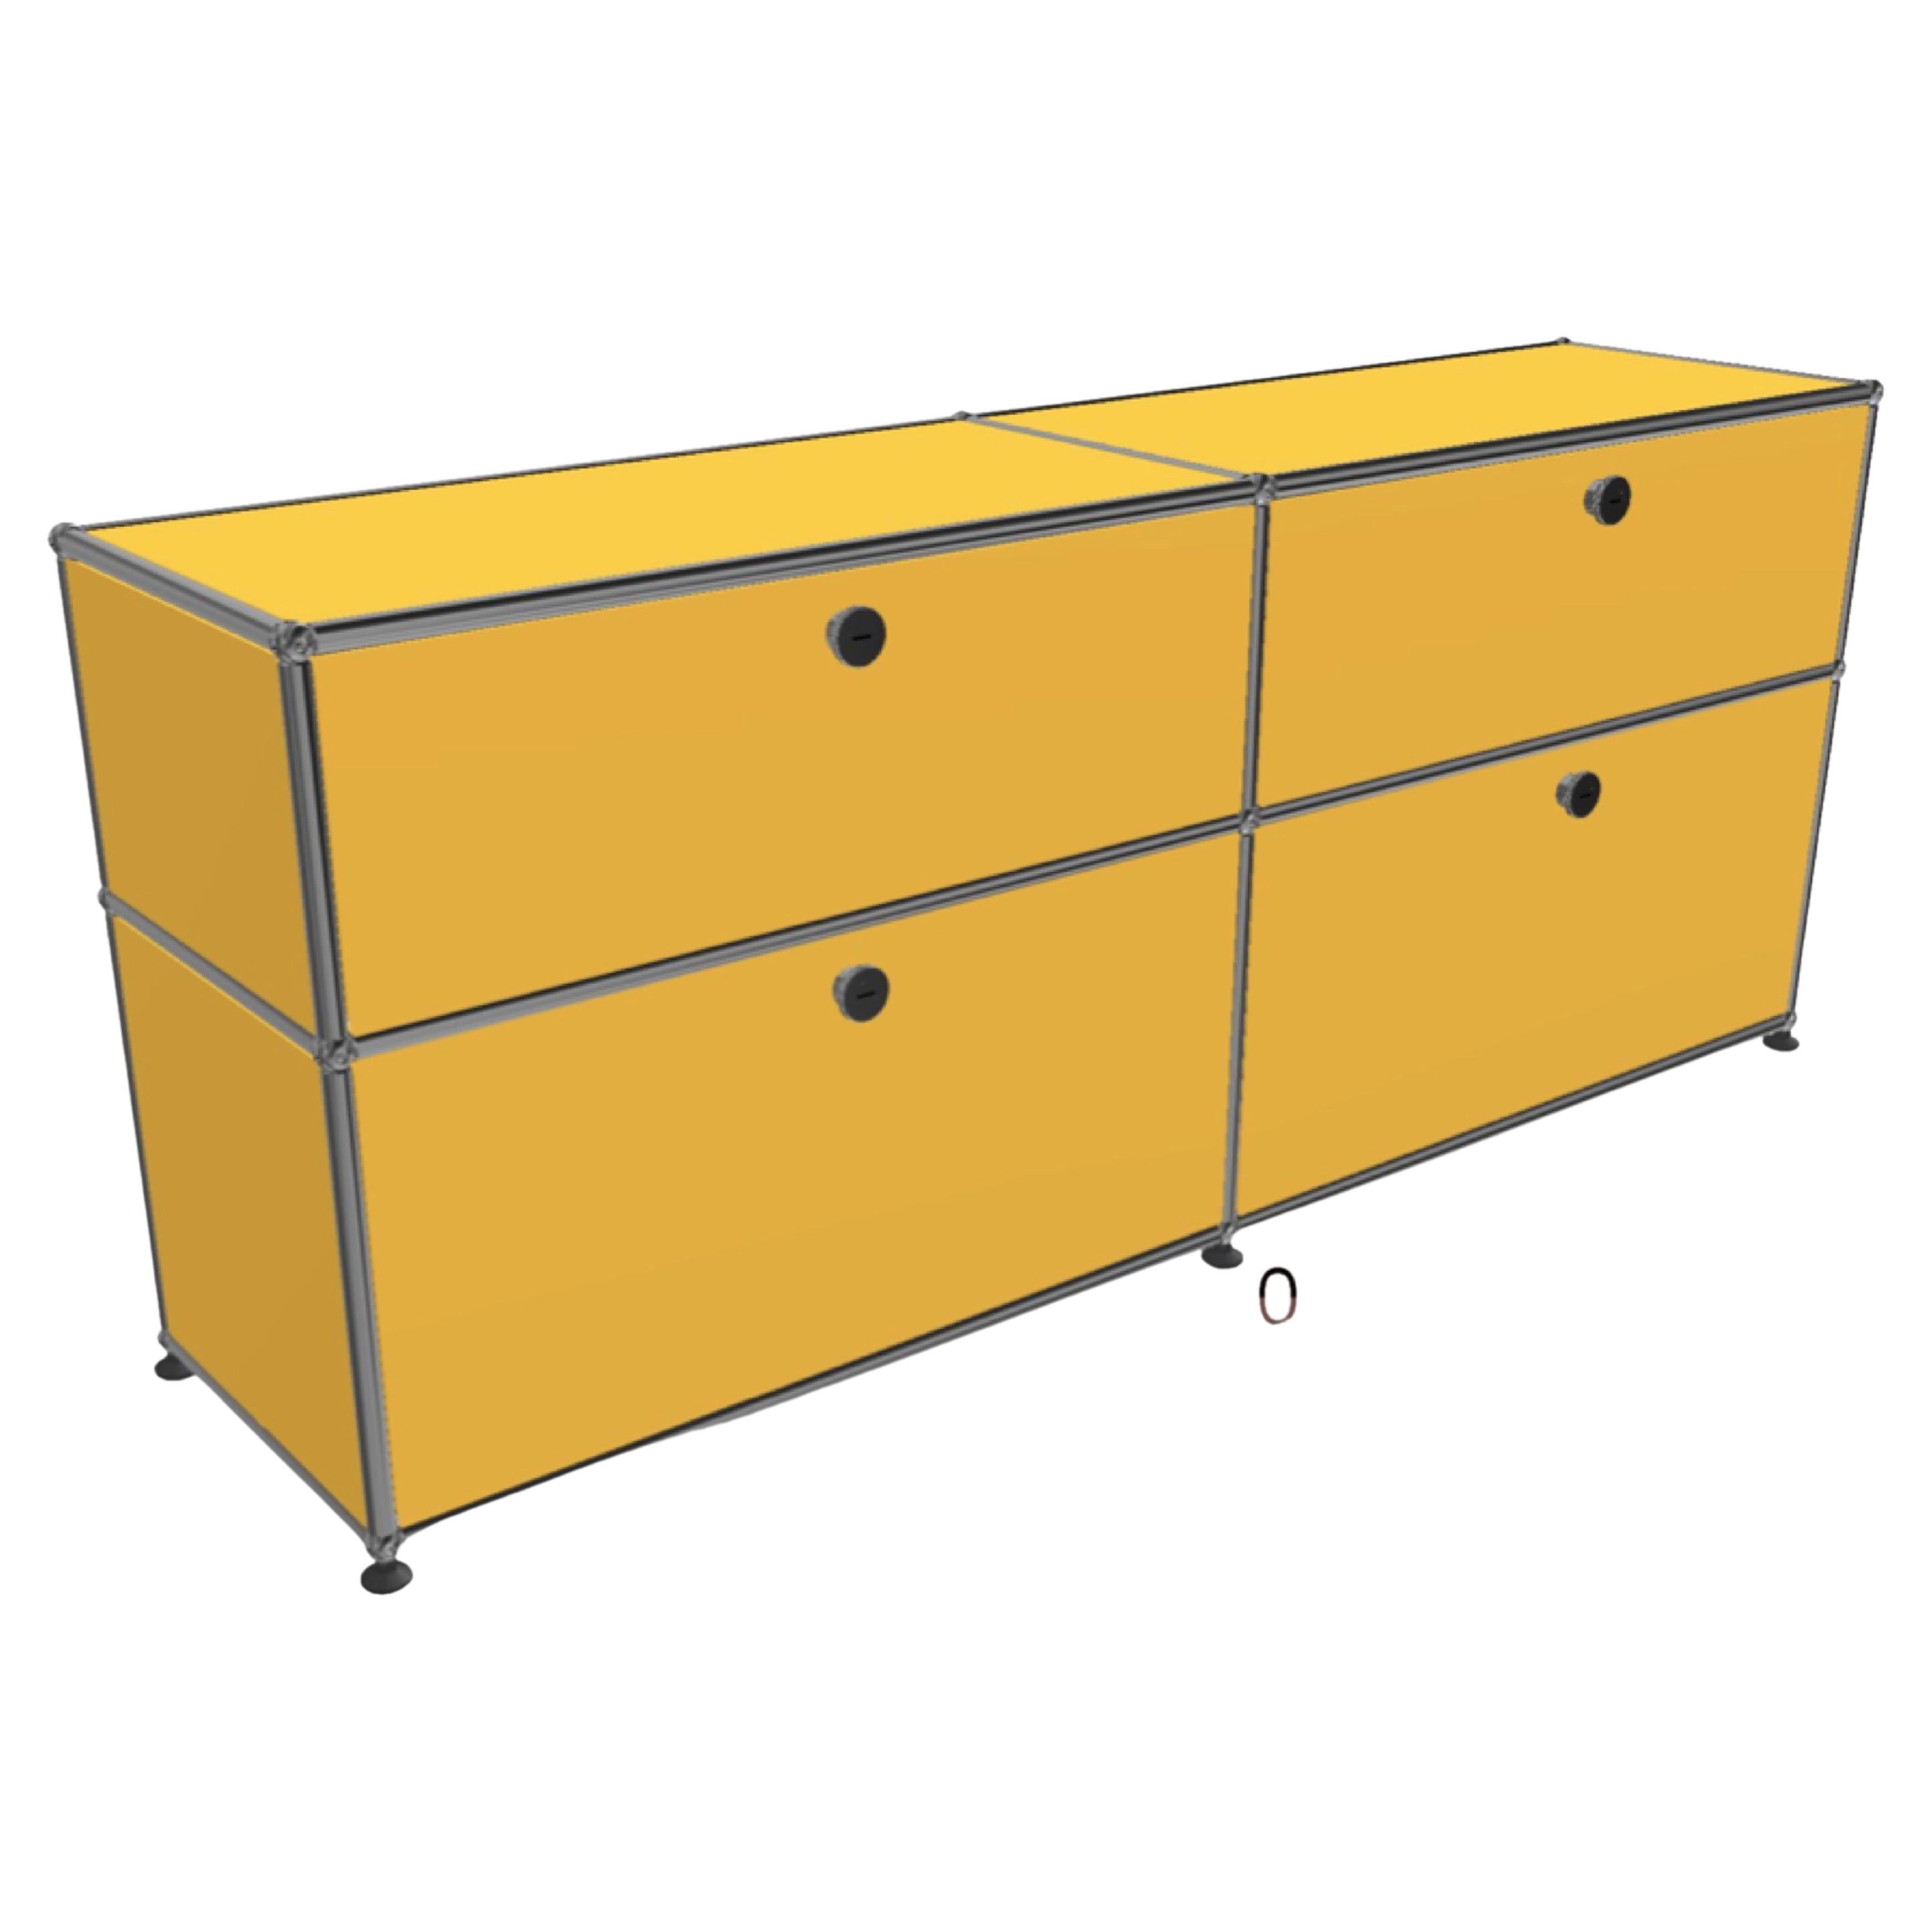 USM Mid Credenza with File Drawers, golden yellow